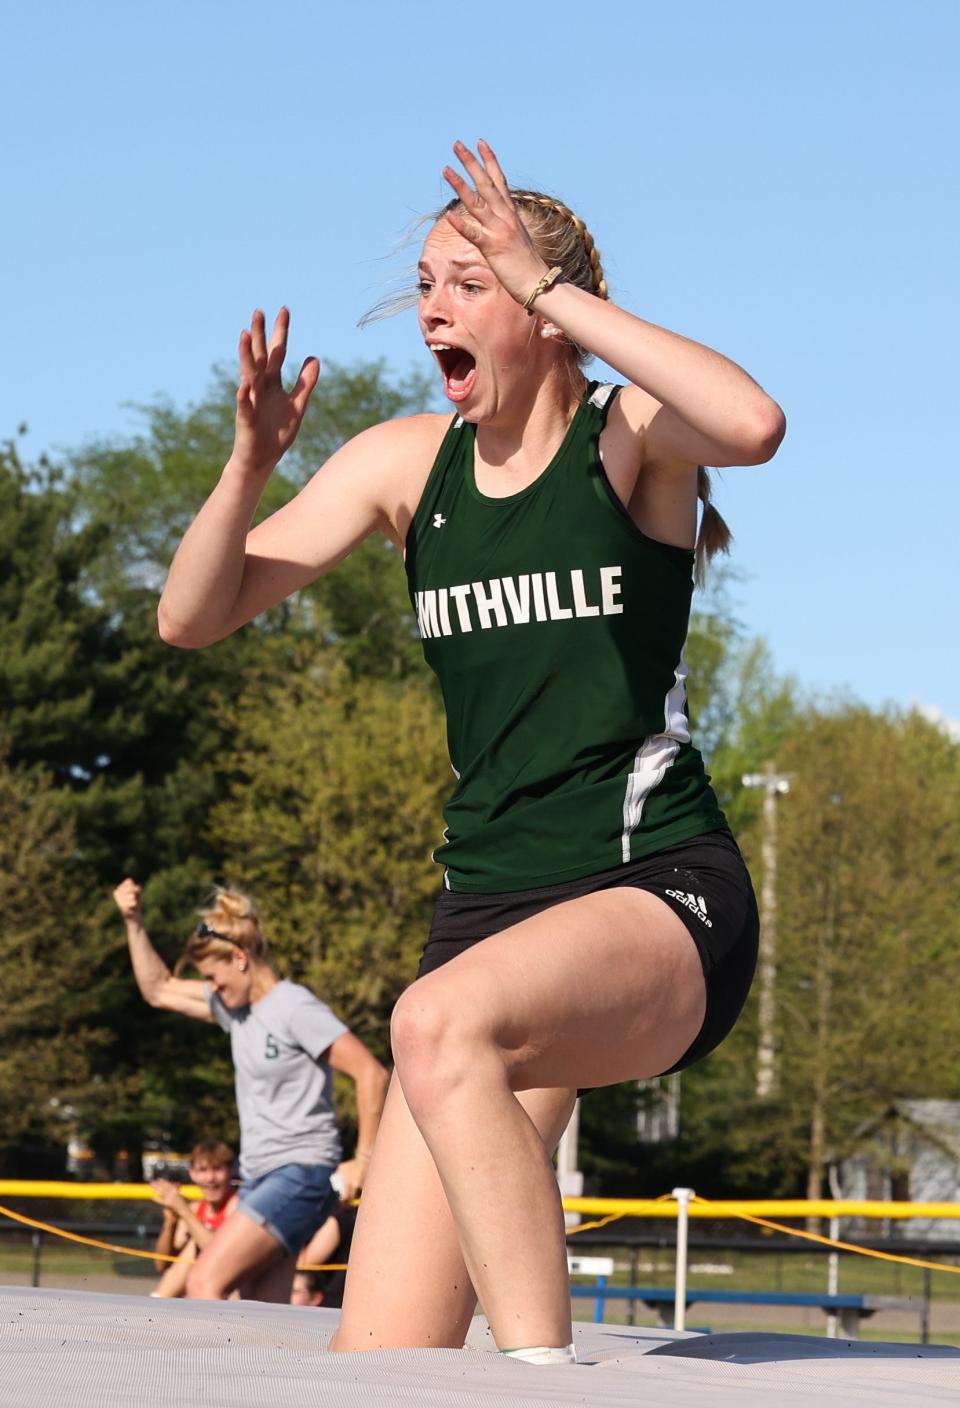 Smithville's Abby Hartzler is beyond excited after clearing 5-4.25 to break school record of 5-4 set in 1983 and matched in 2017 by Taylor McCanna.